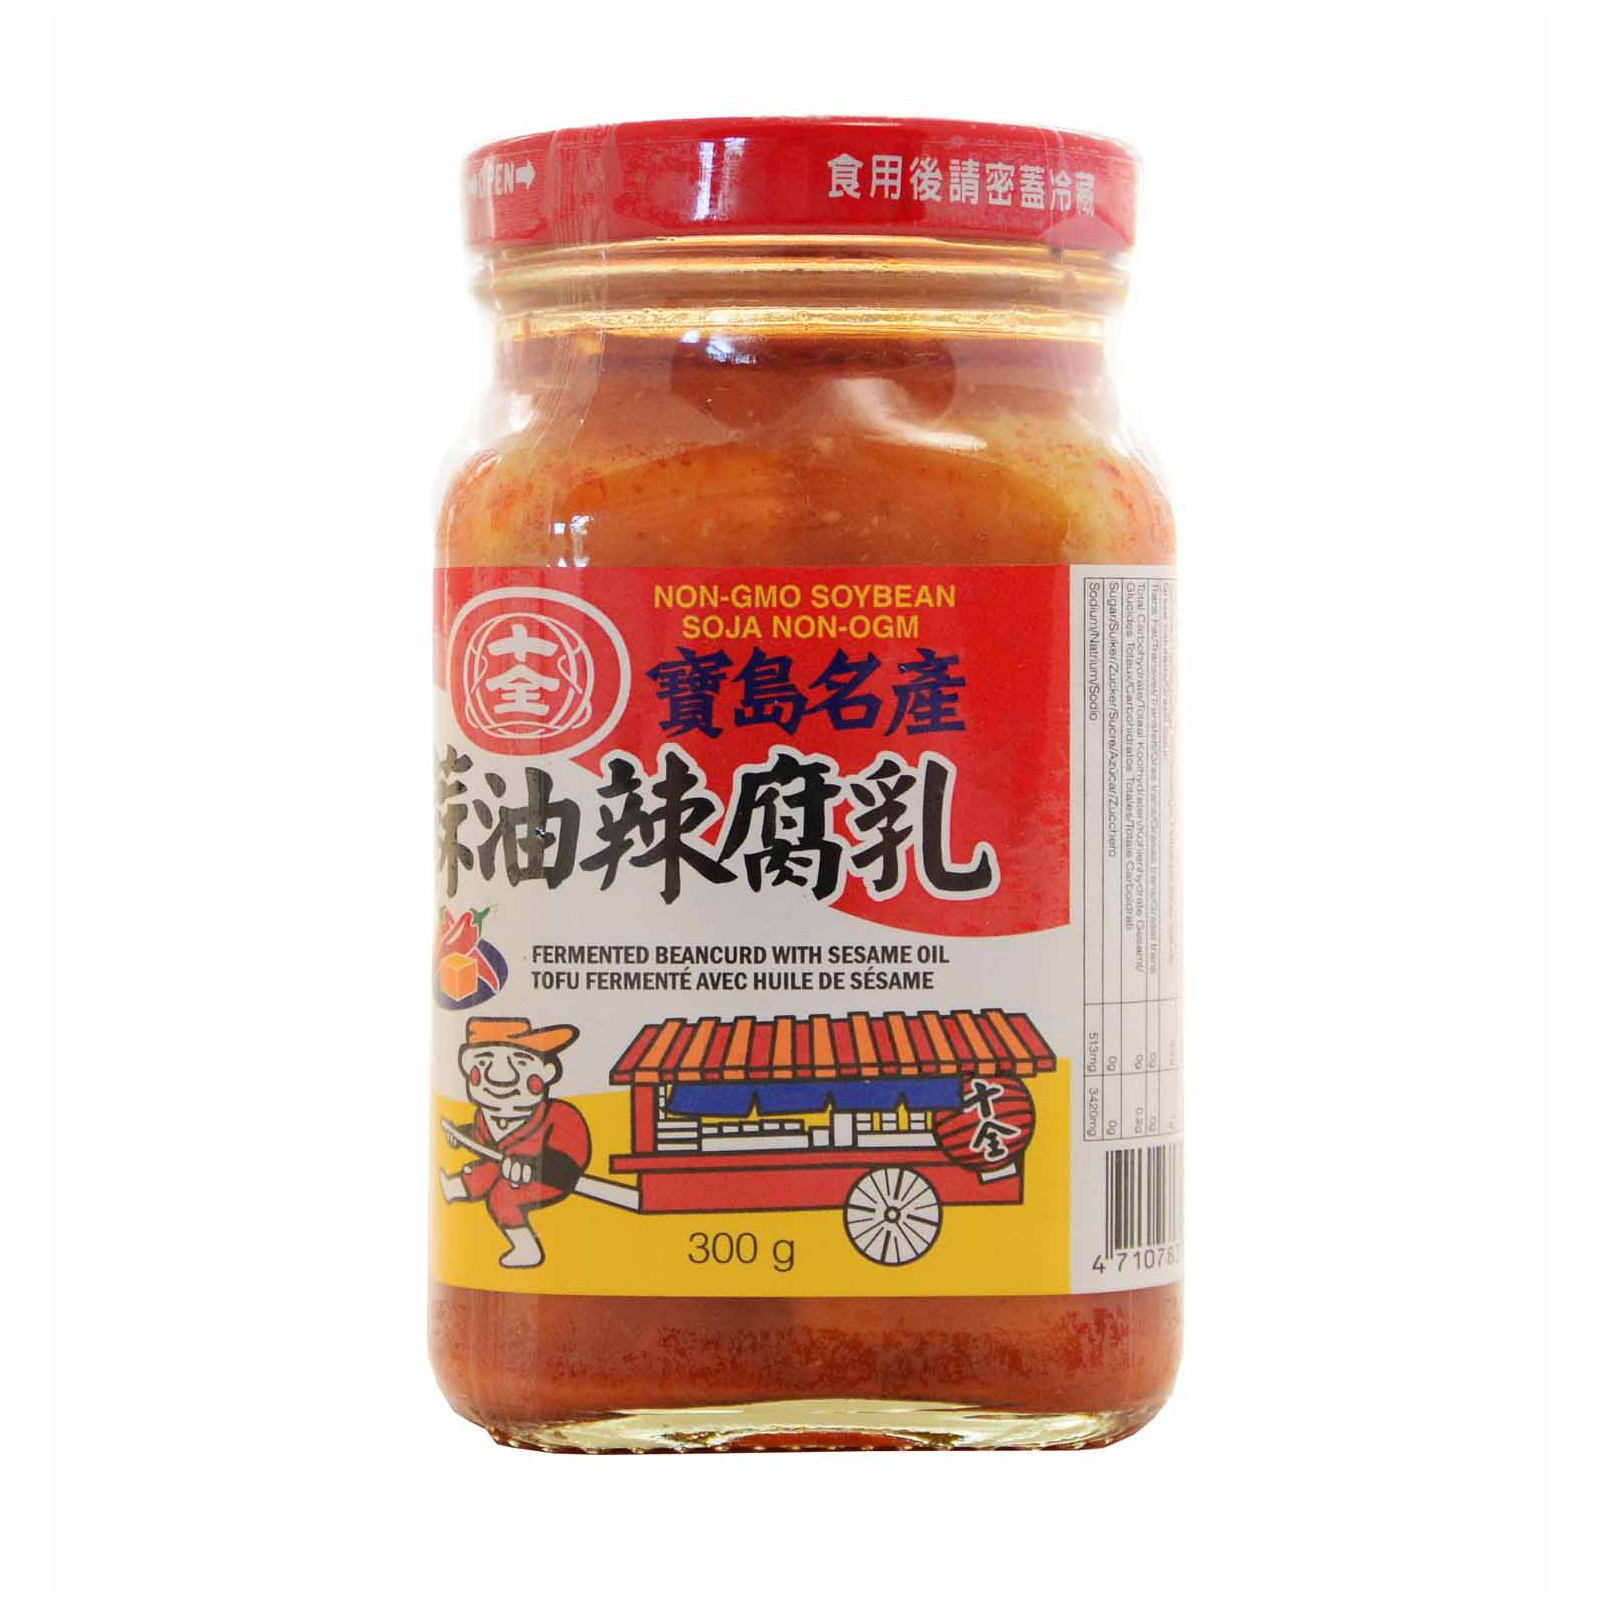  Fermented beancurd with sesame oil